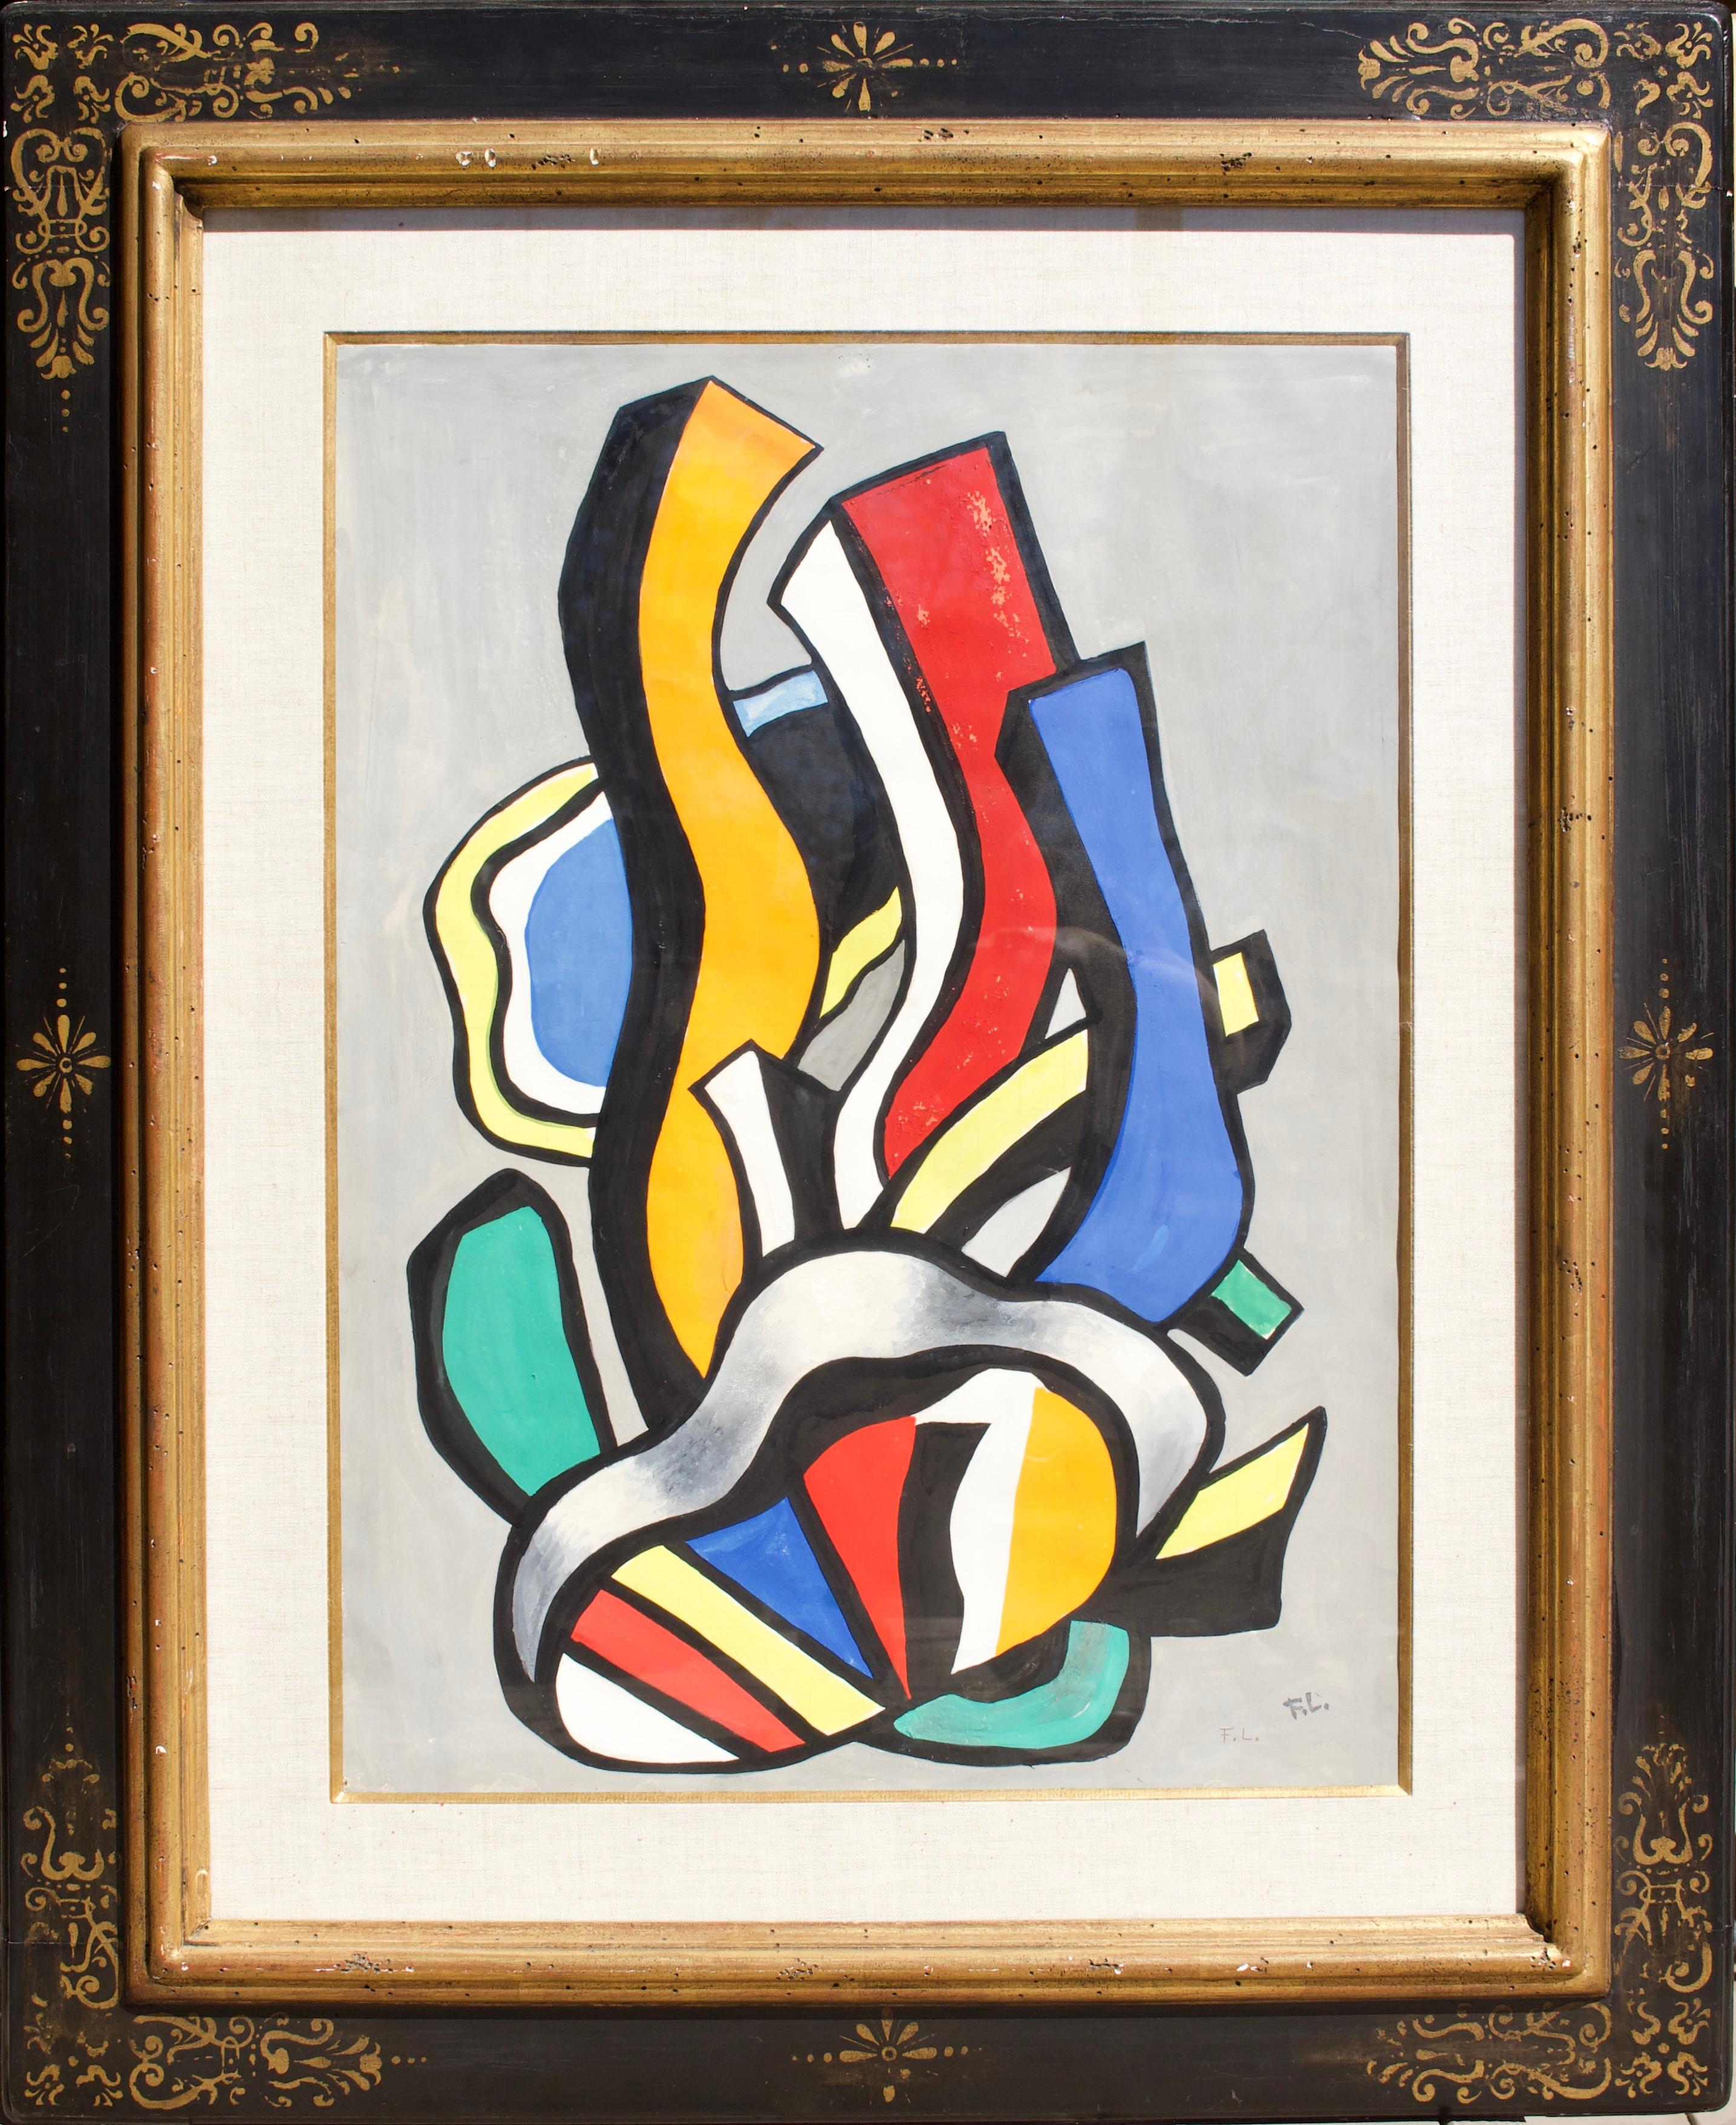 Architectural Composition - Painting by Fernand Léger